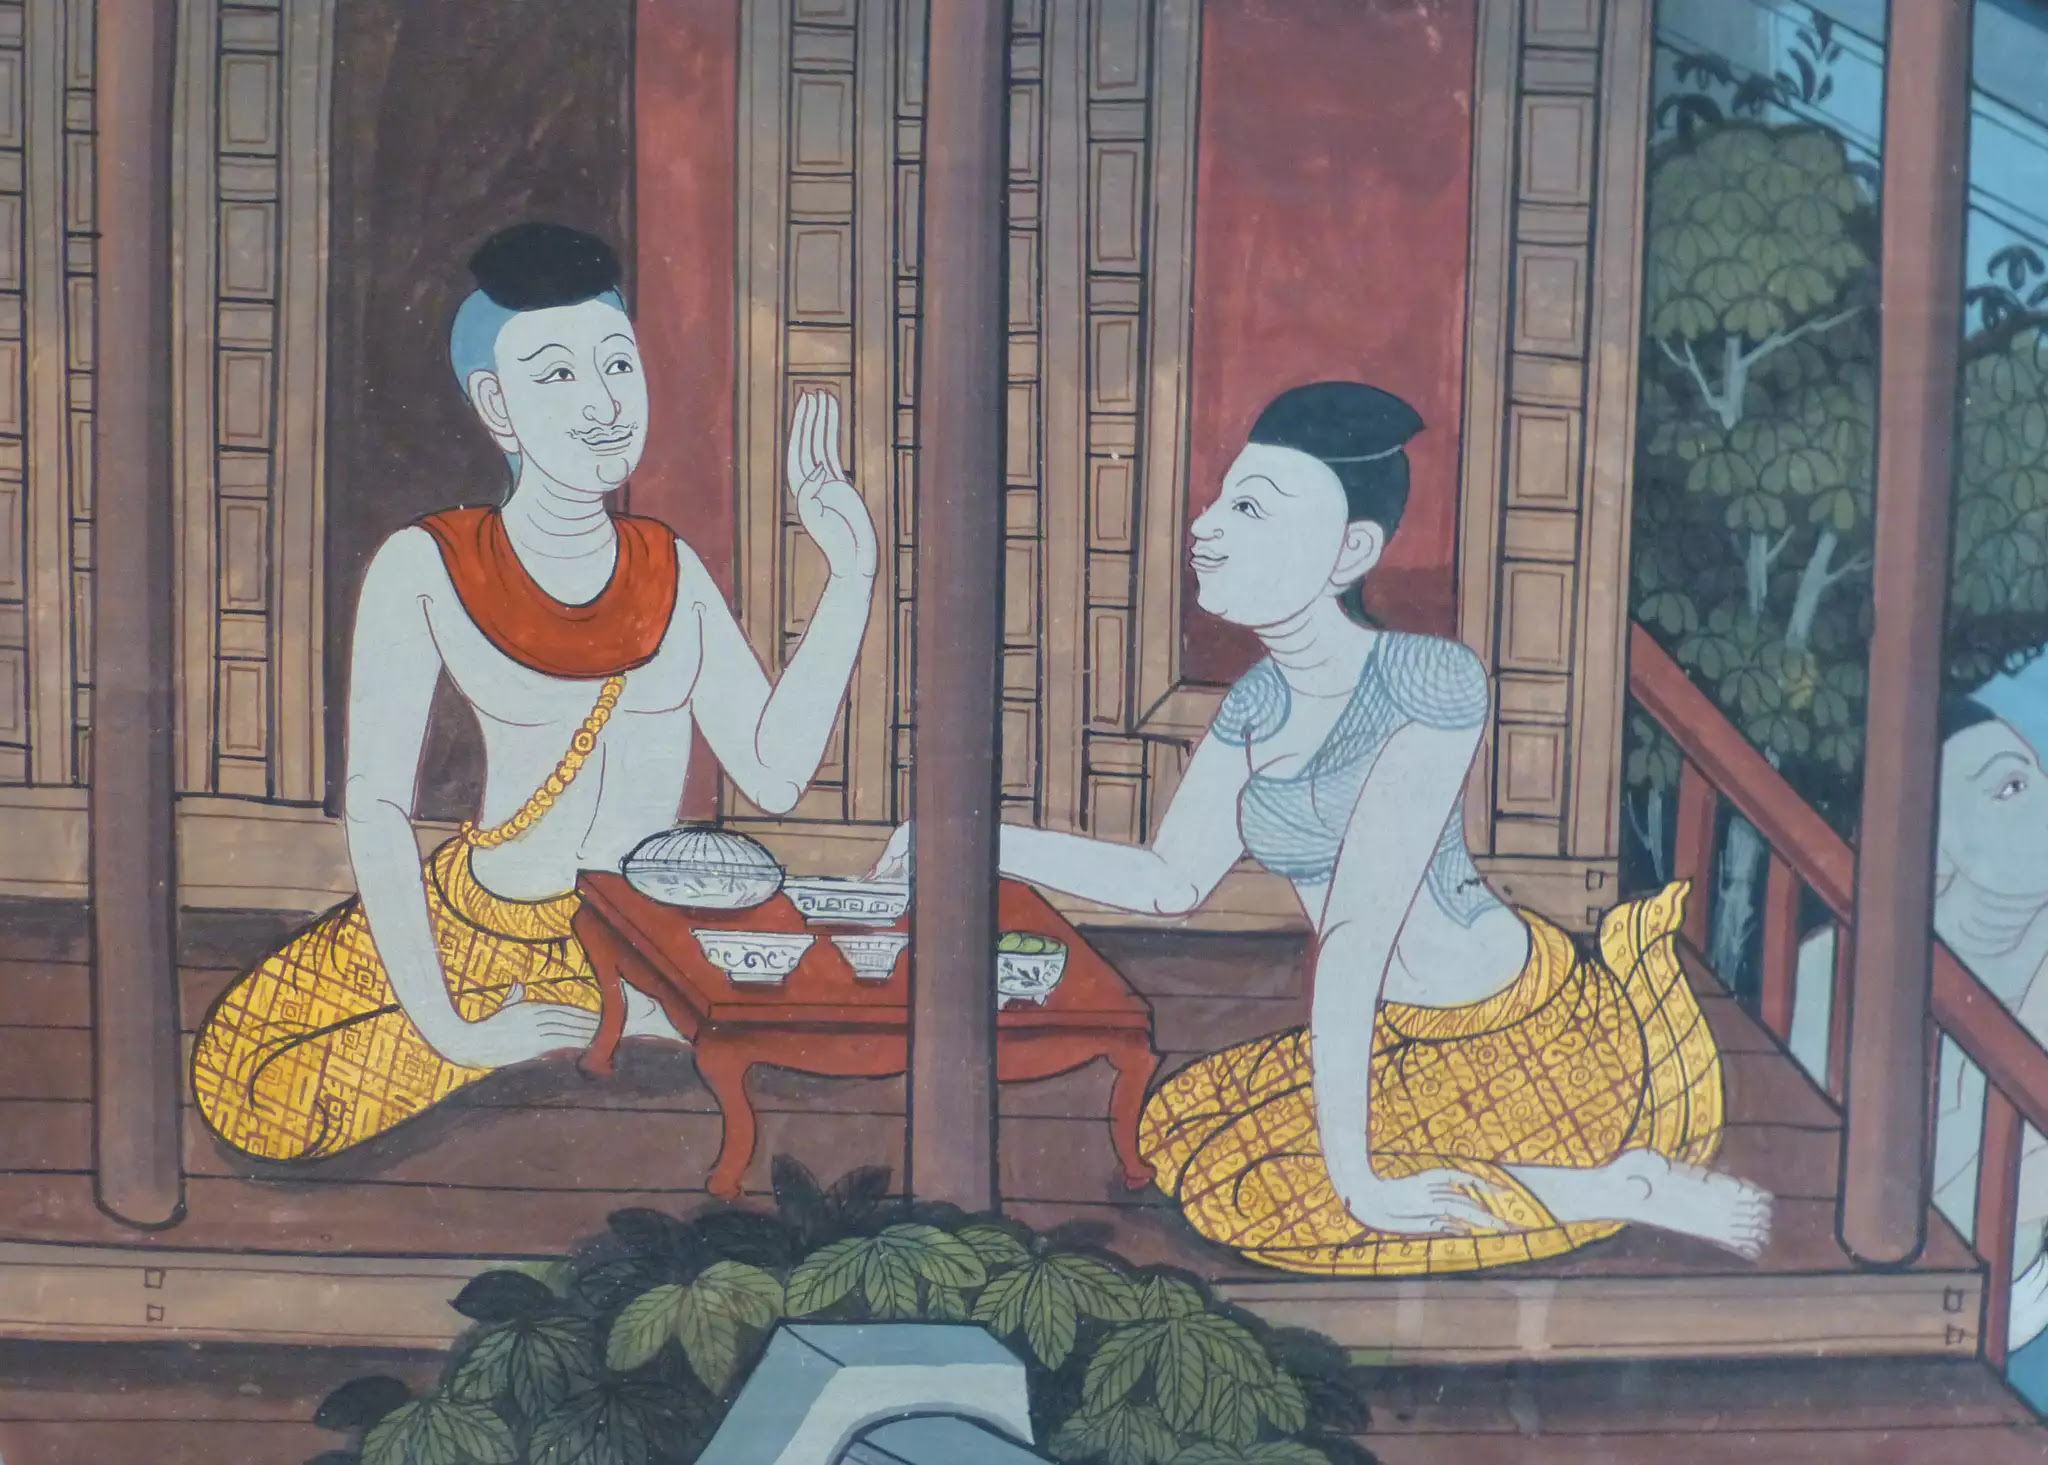 Painting of Dhammadinna and Viskha from from a mural at Wat Pho, a temple in Bangkok, Thailand.